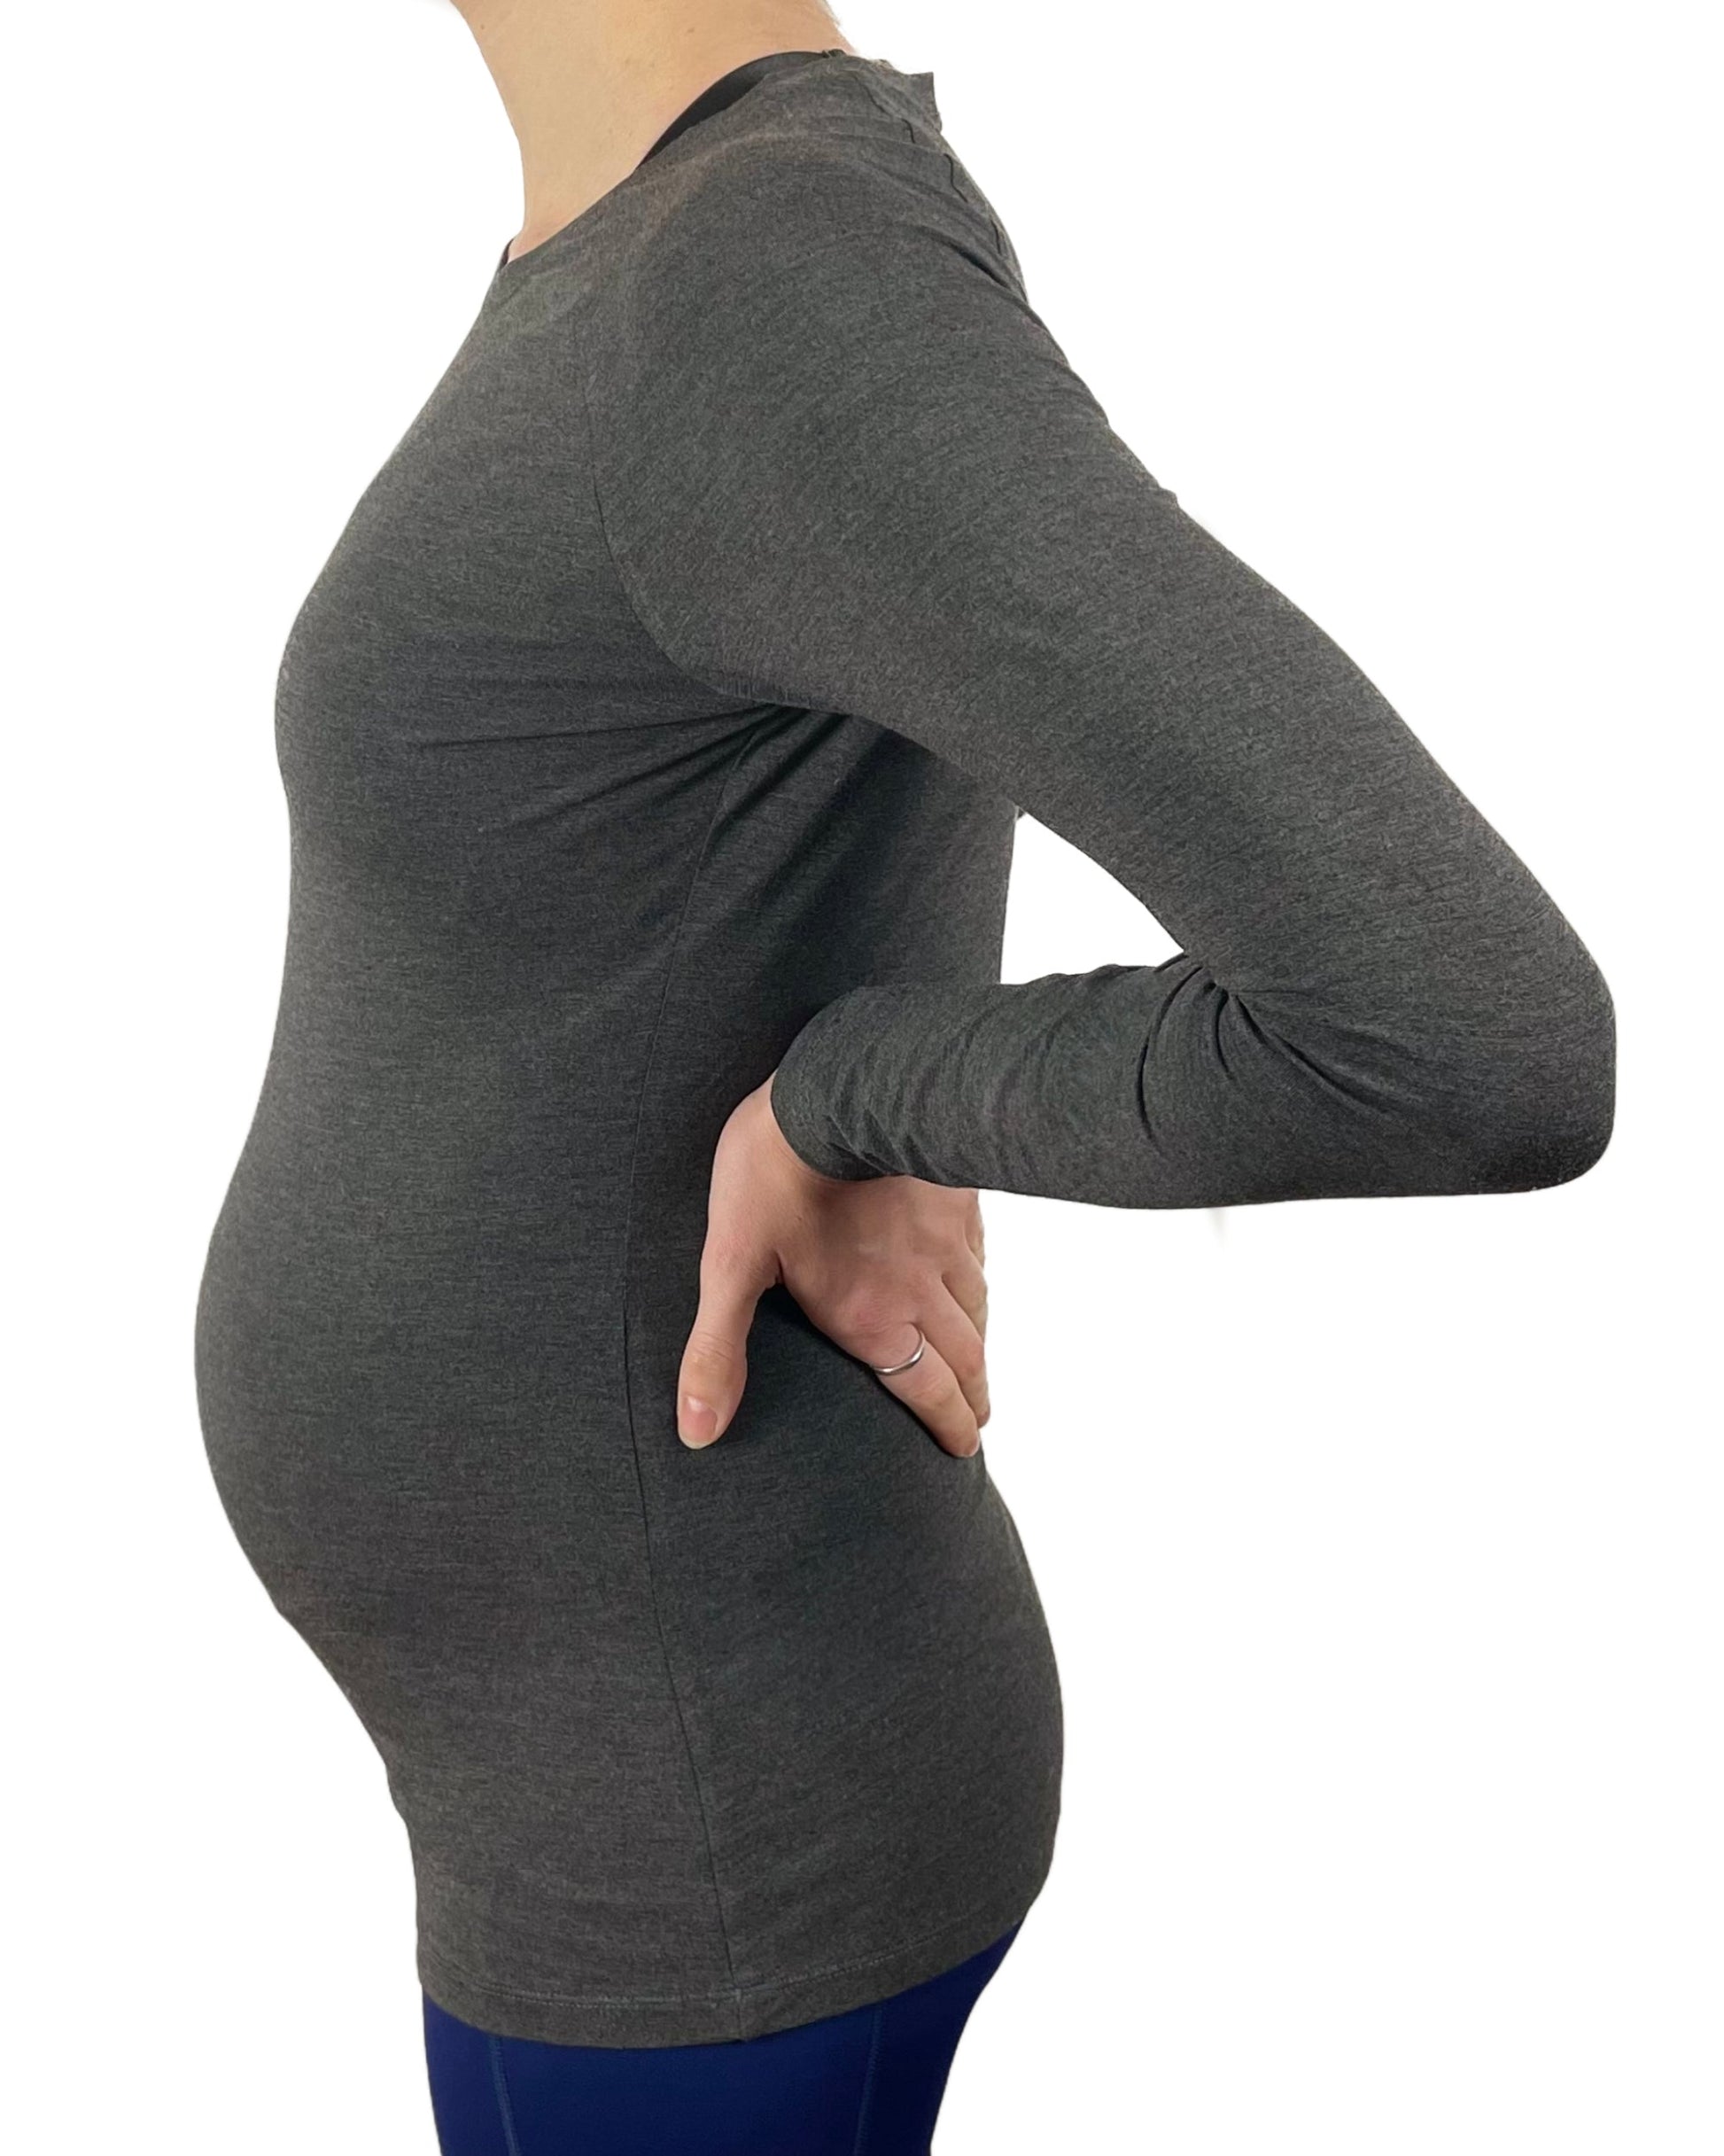 Maternity top side view